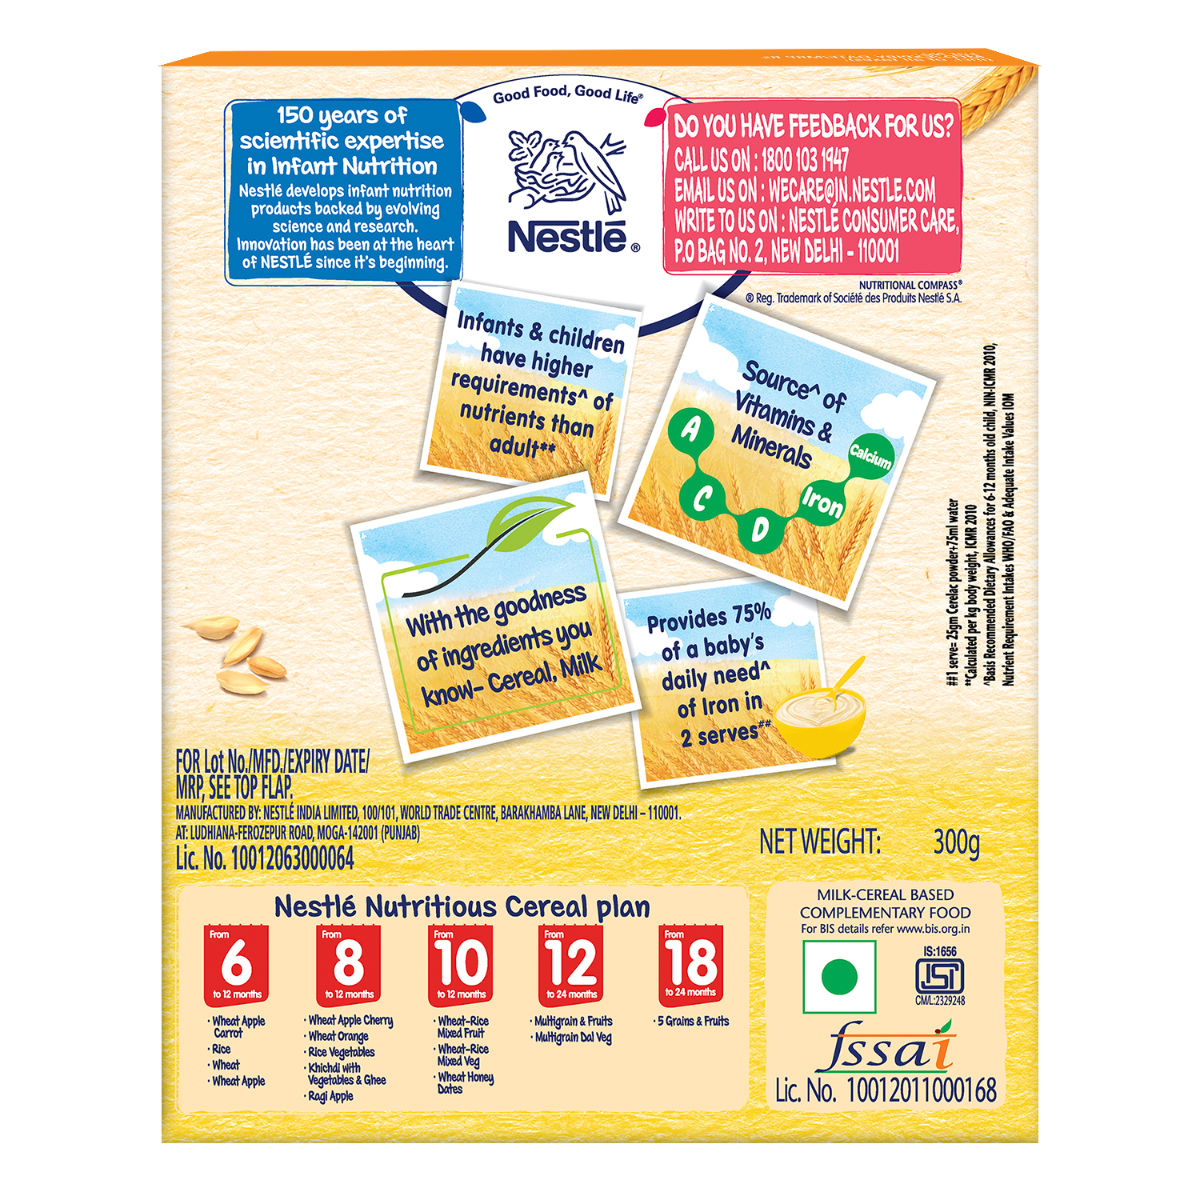 Nestle Cerelac Wheat Baby Cereal, 6 to 12 Months, 300 gm Refill Pack, Pack of 1 